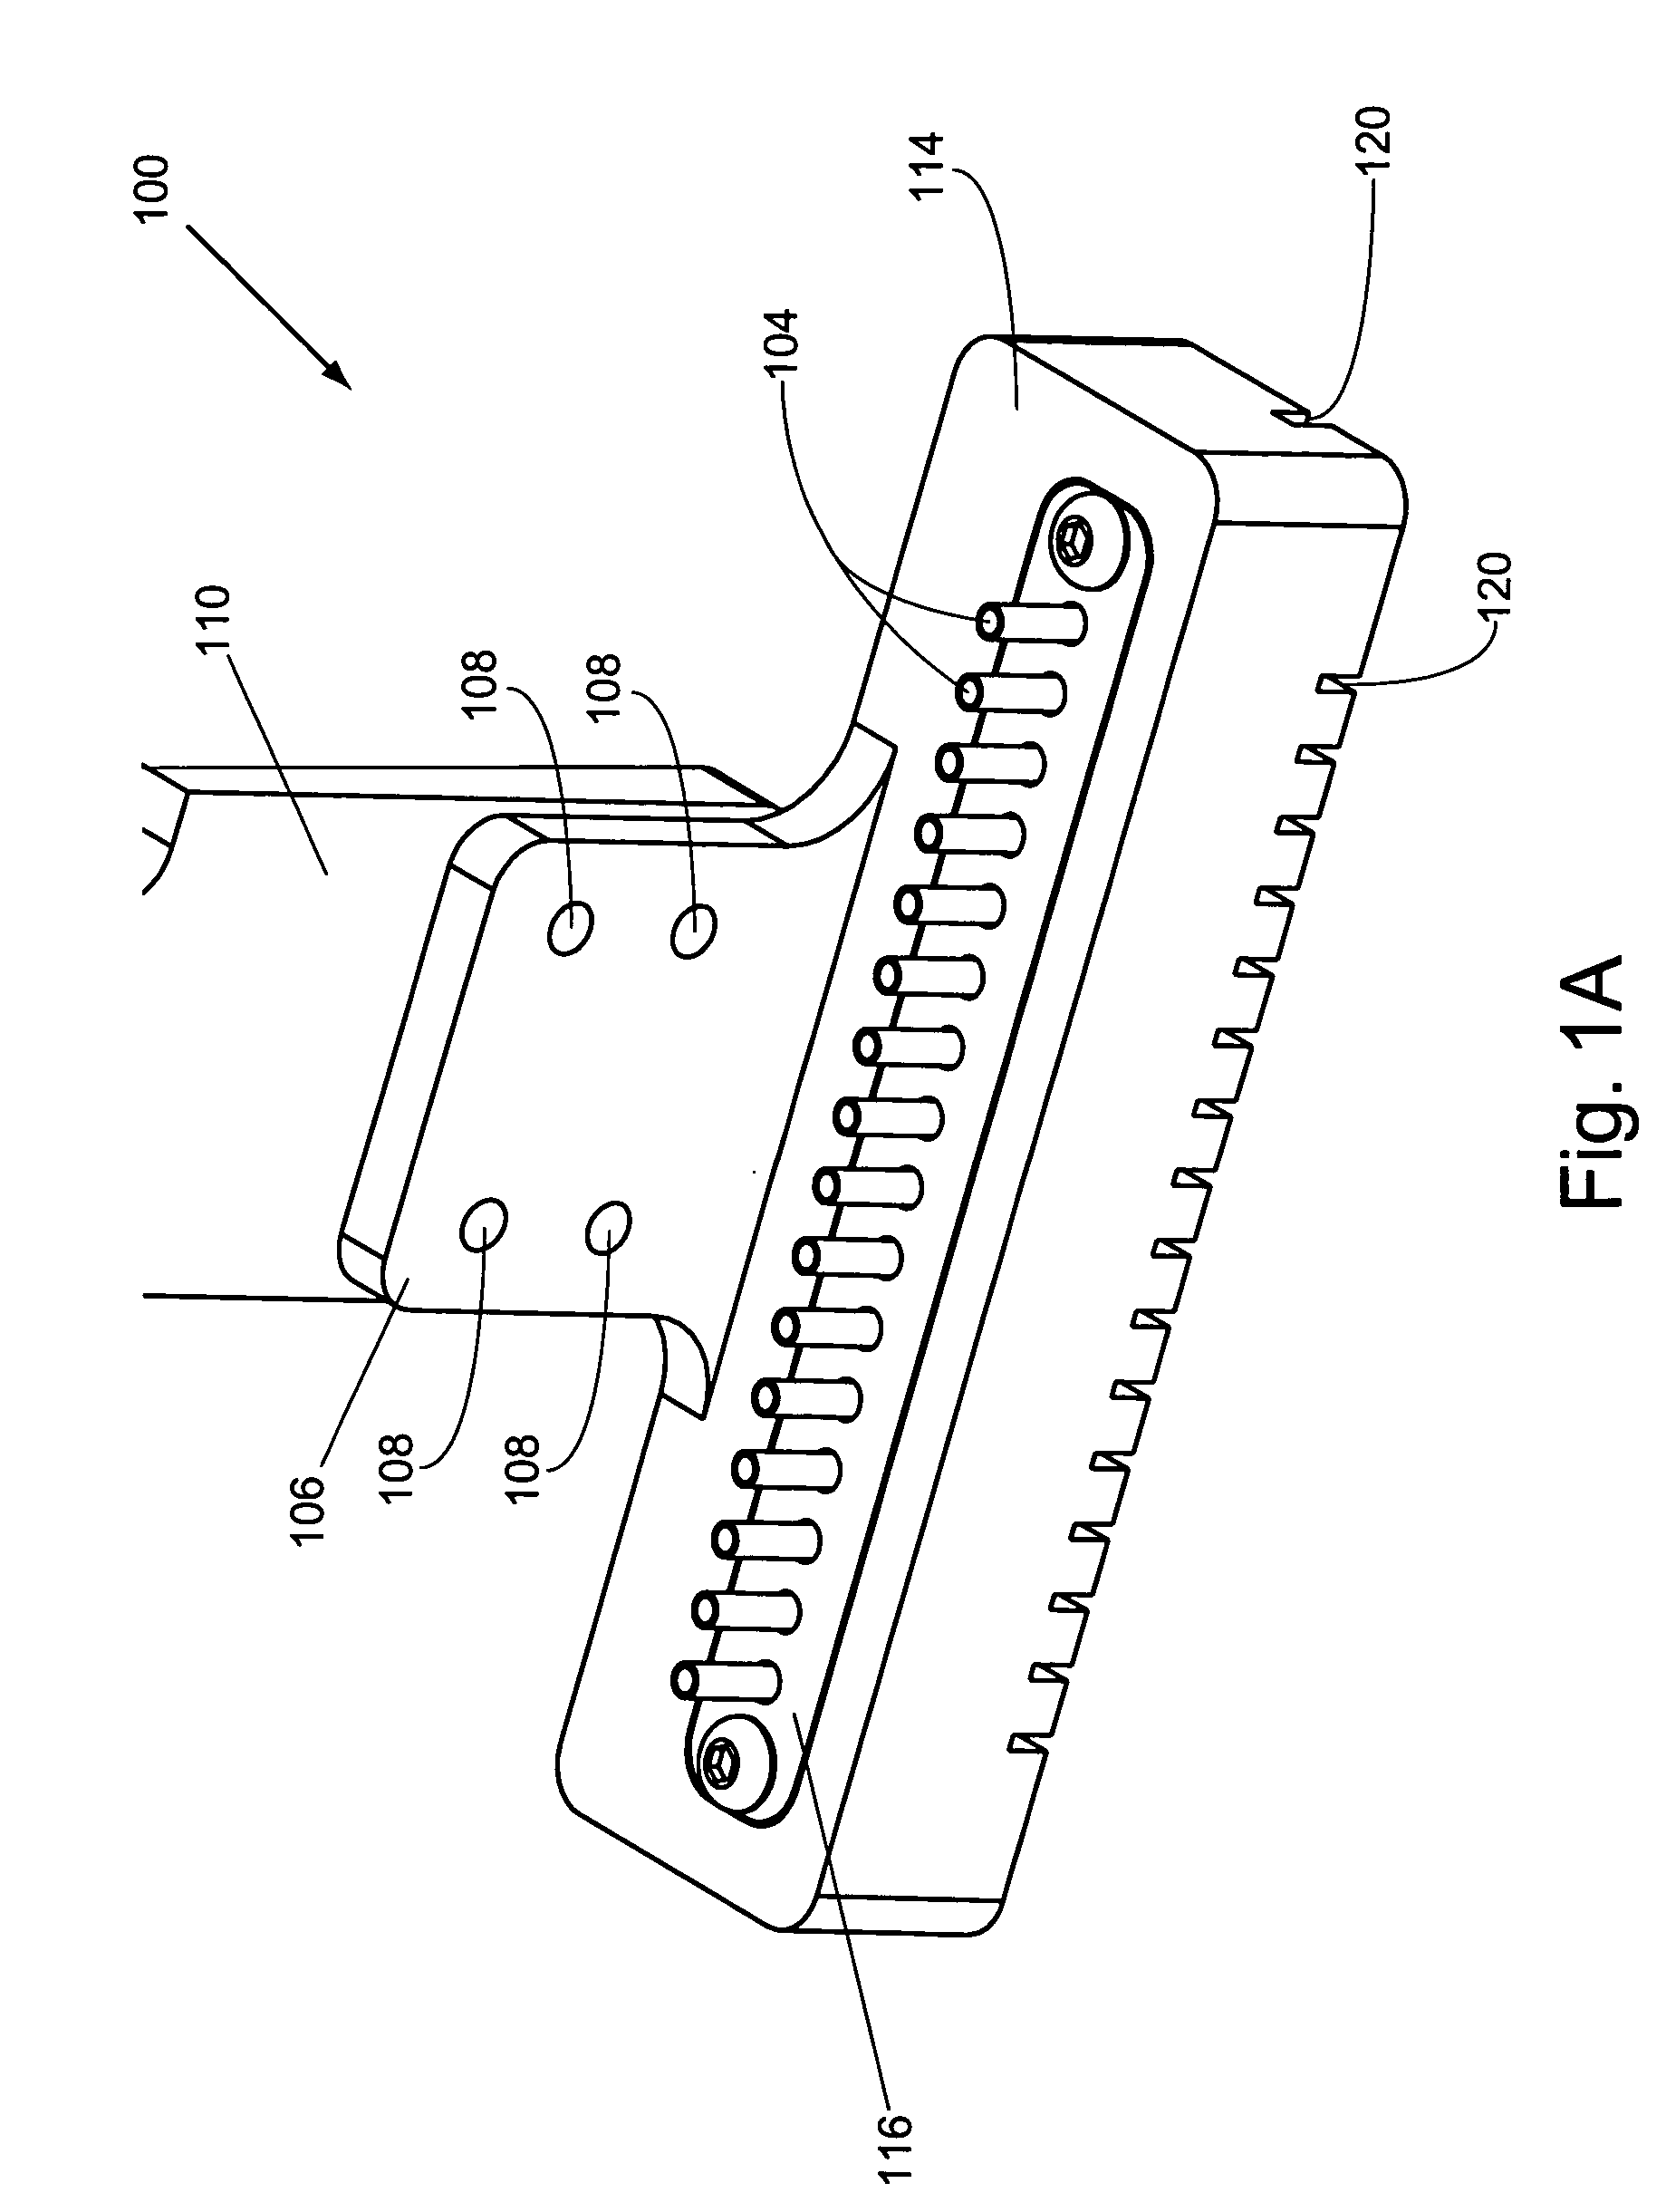 Material removal and dispensing devices, systems, and methods